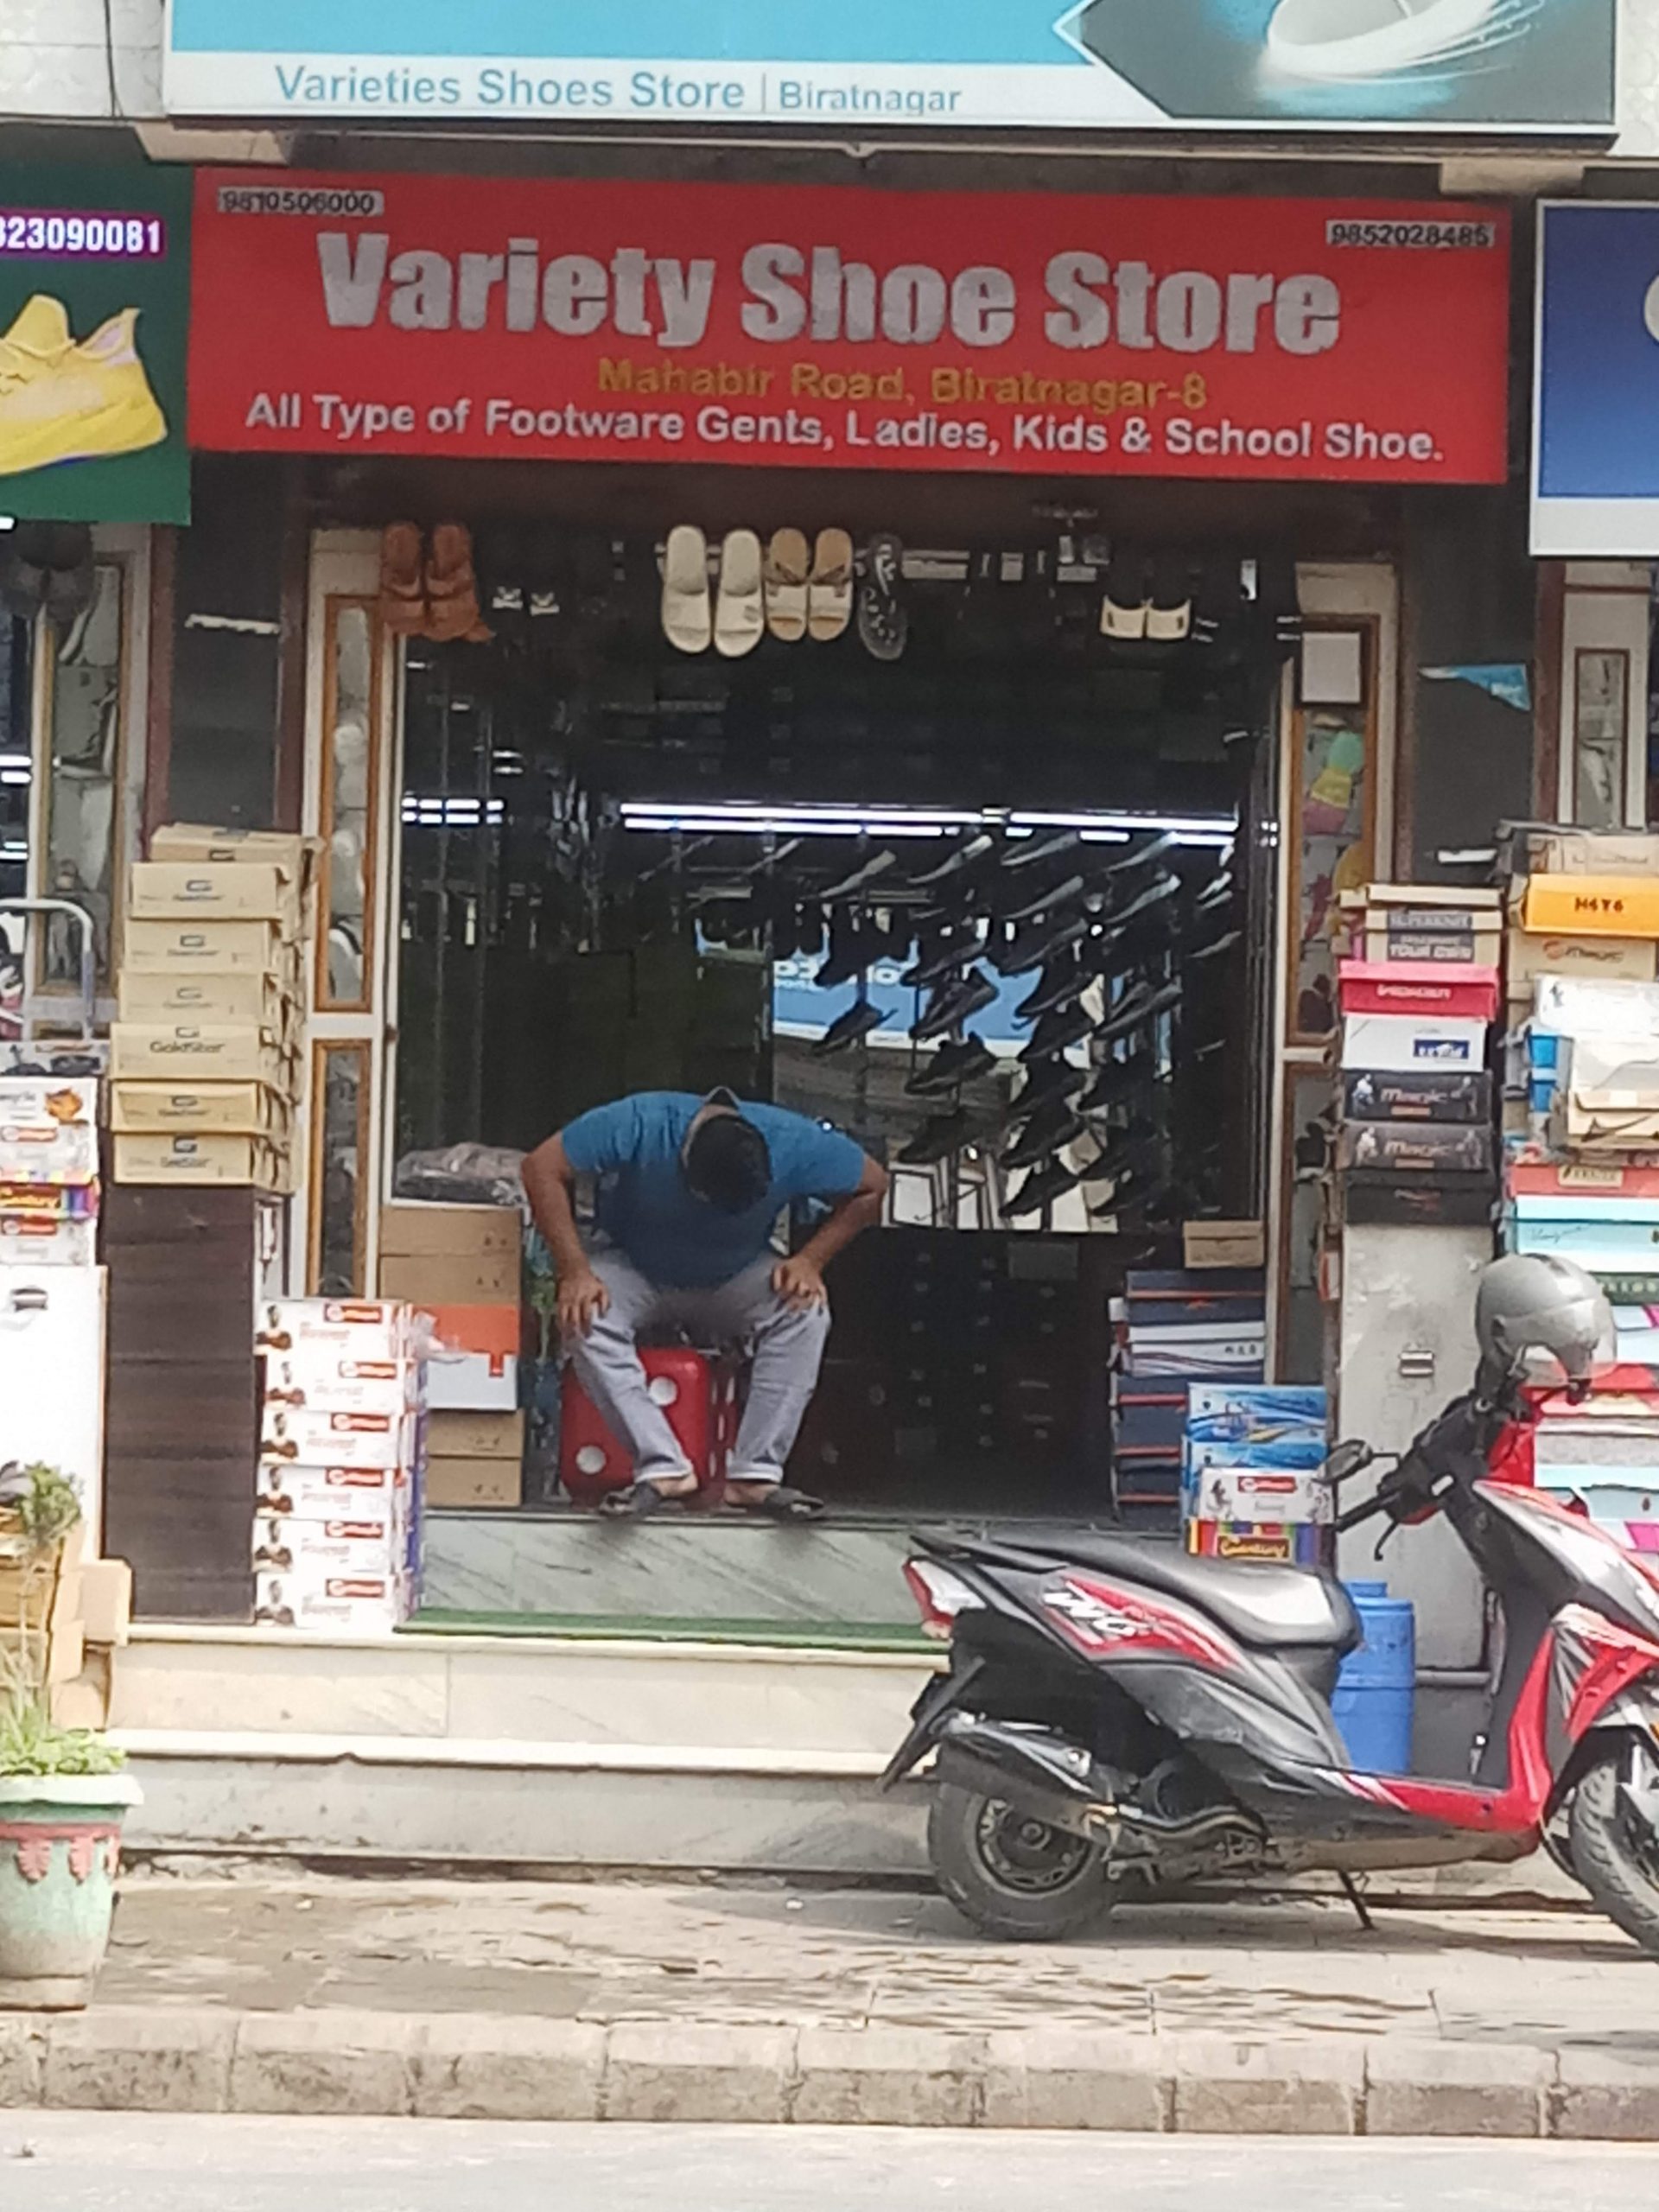 Variety shoes store